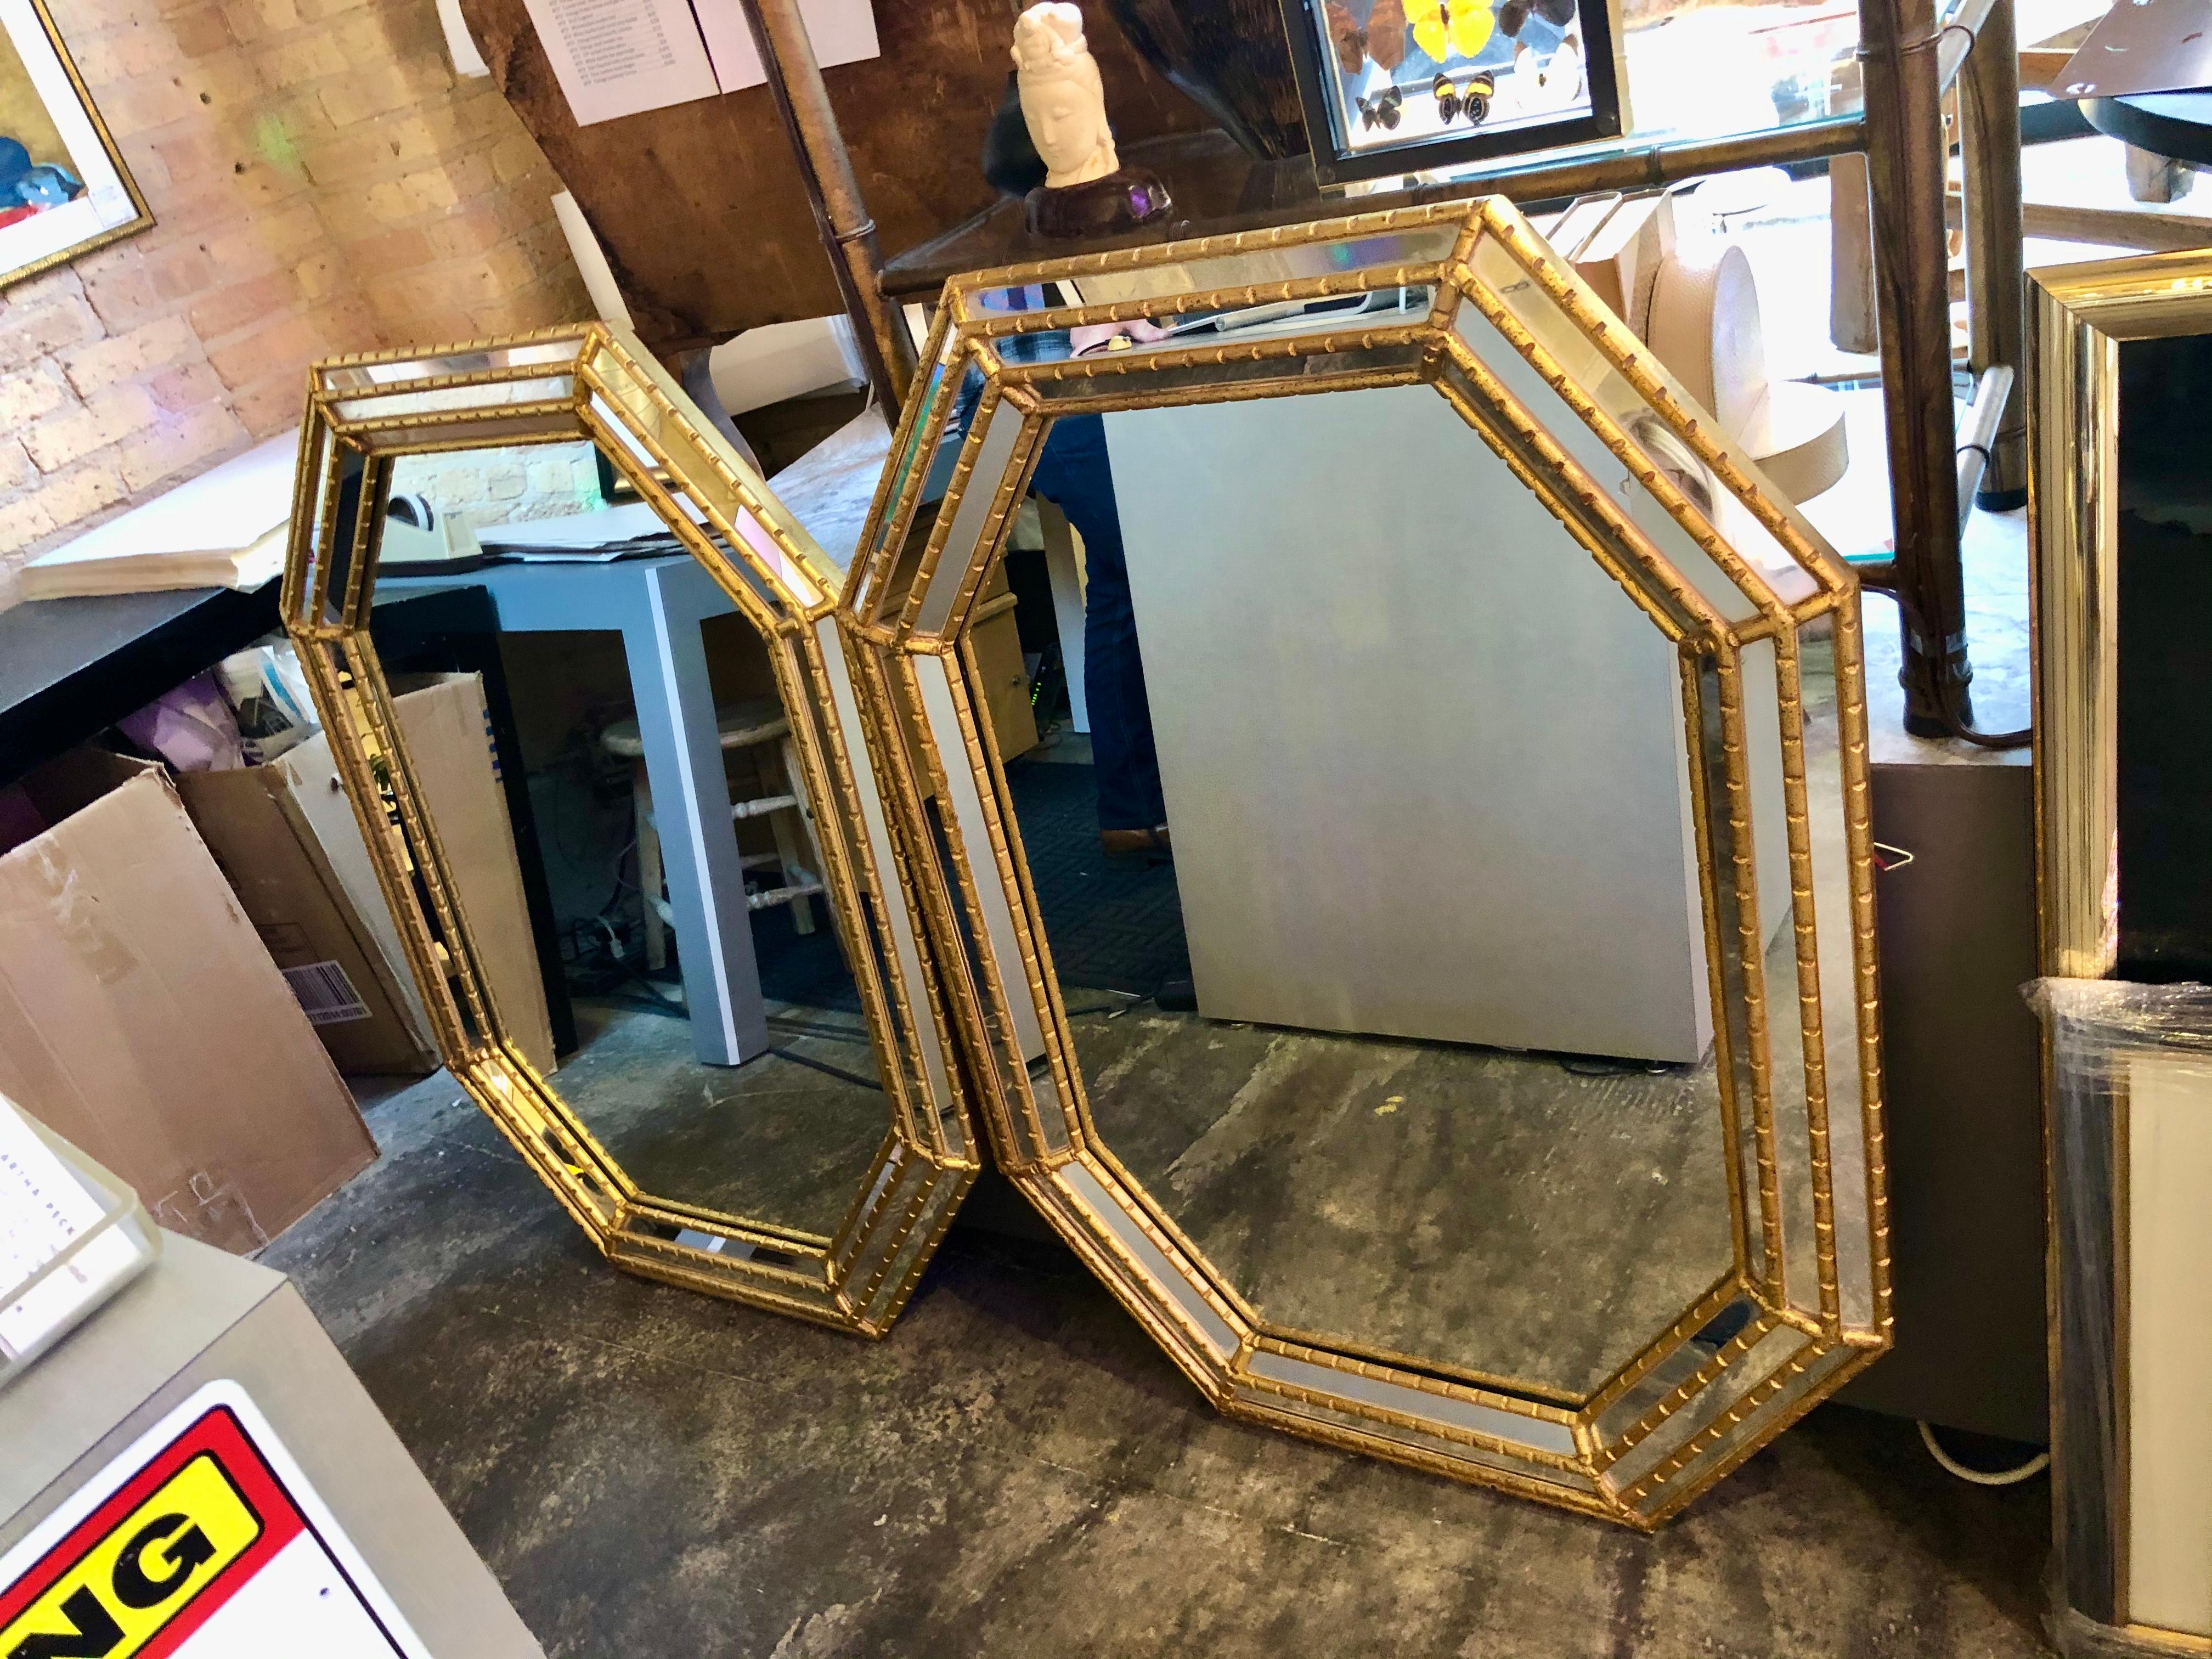 American Pair of Hollywood Regency Style Gilt Faux Bamboo Octagonal Mirrors by La Barge